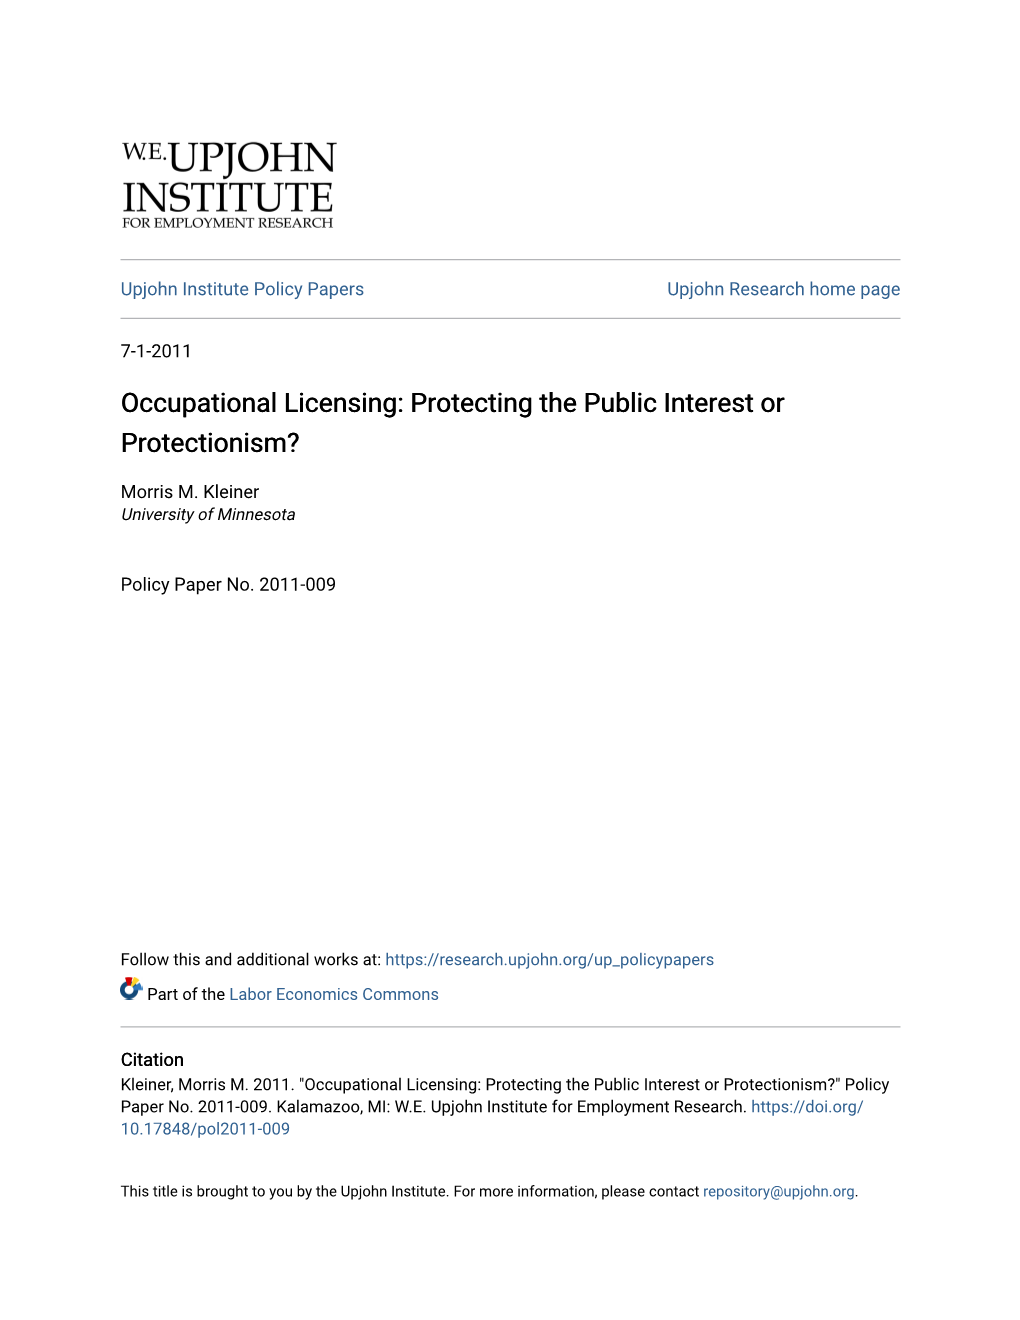 Occupational Licensing: Protecting the Public Interest Or Protectionism?